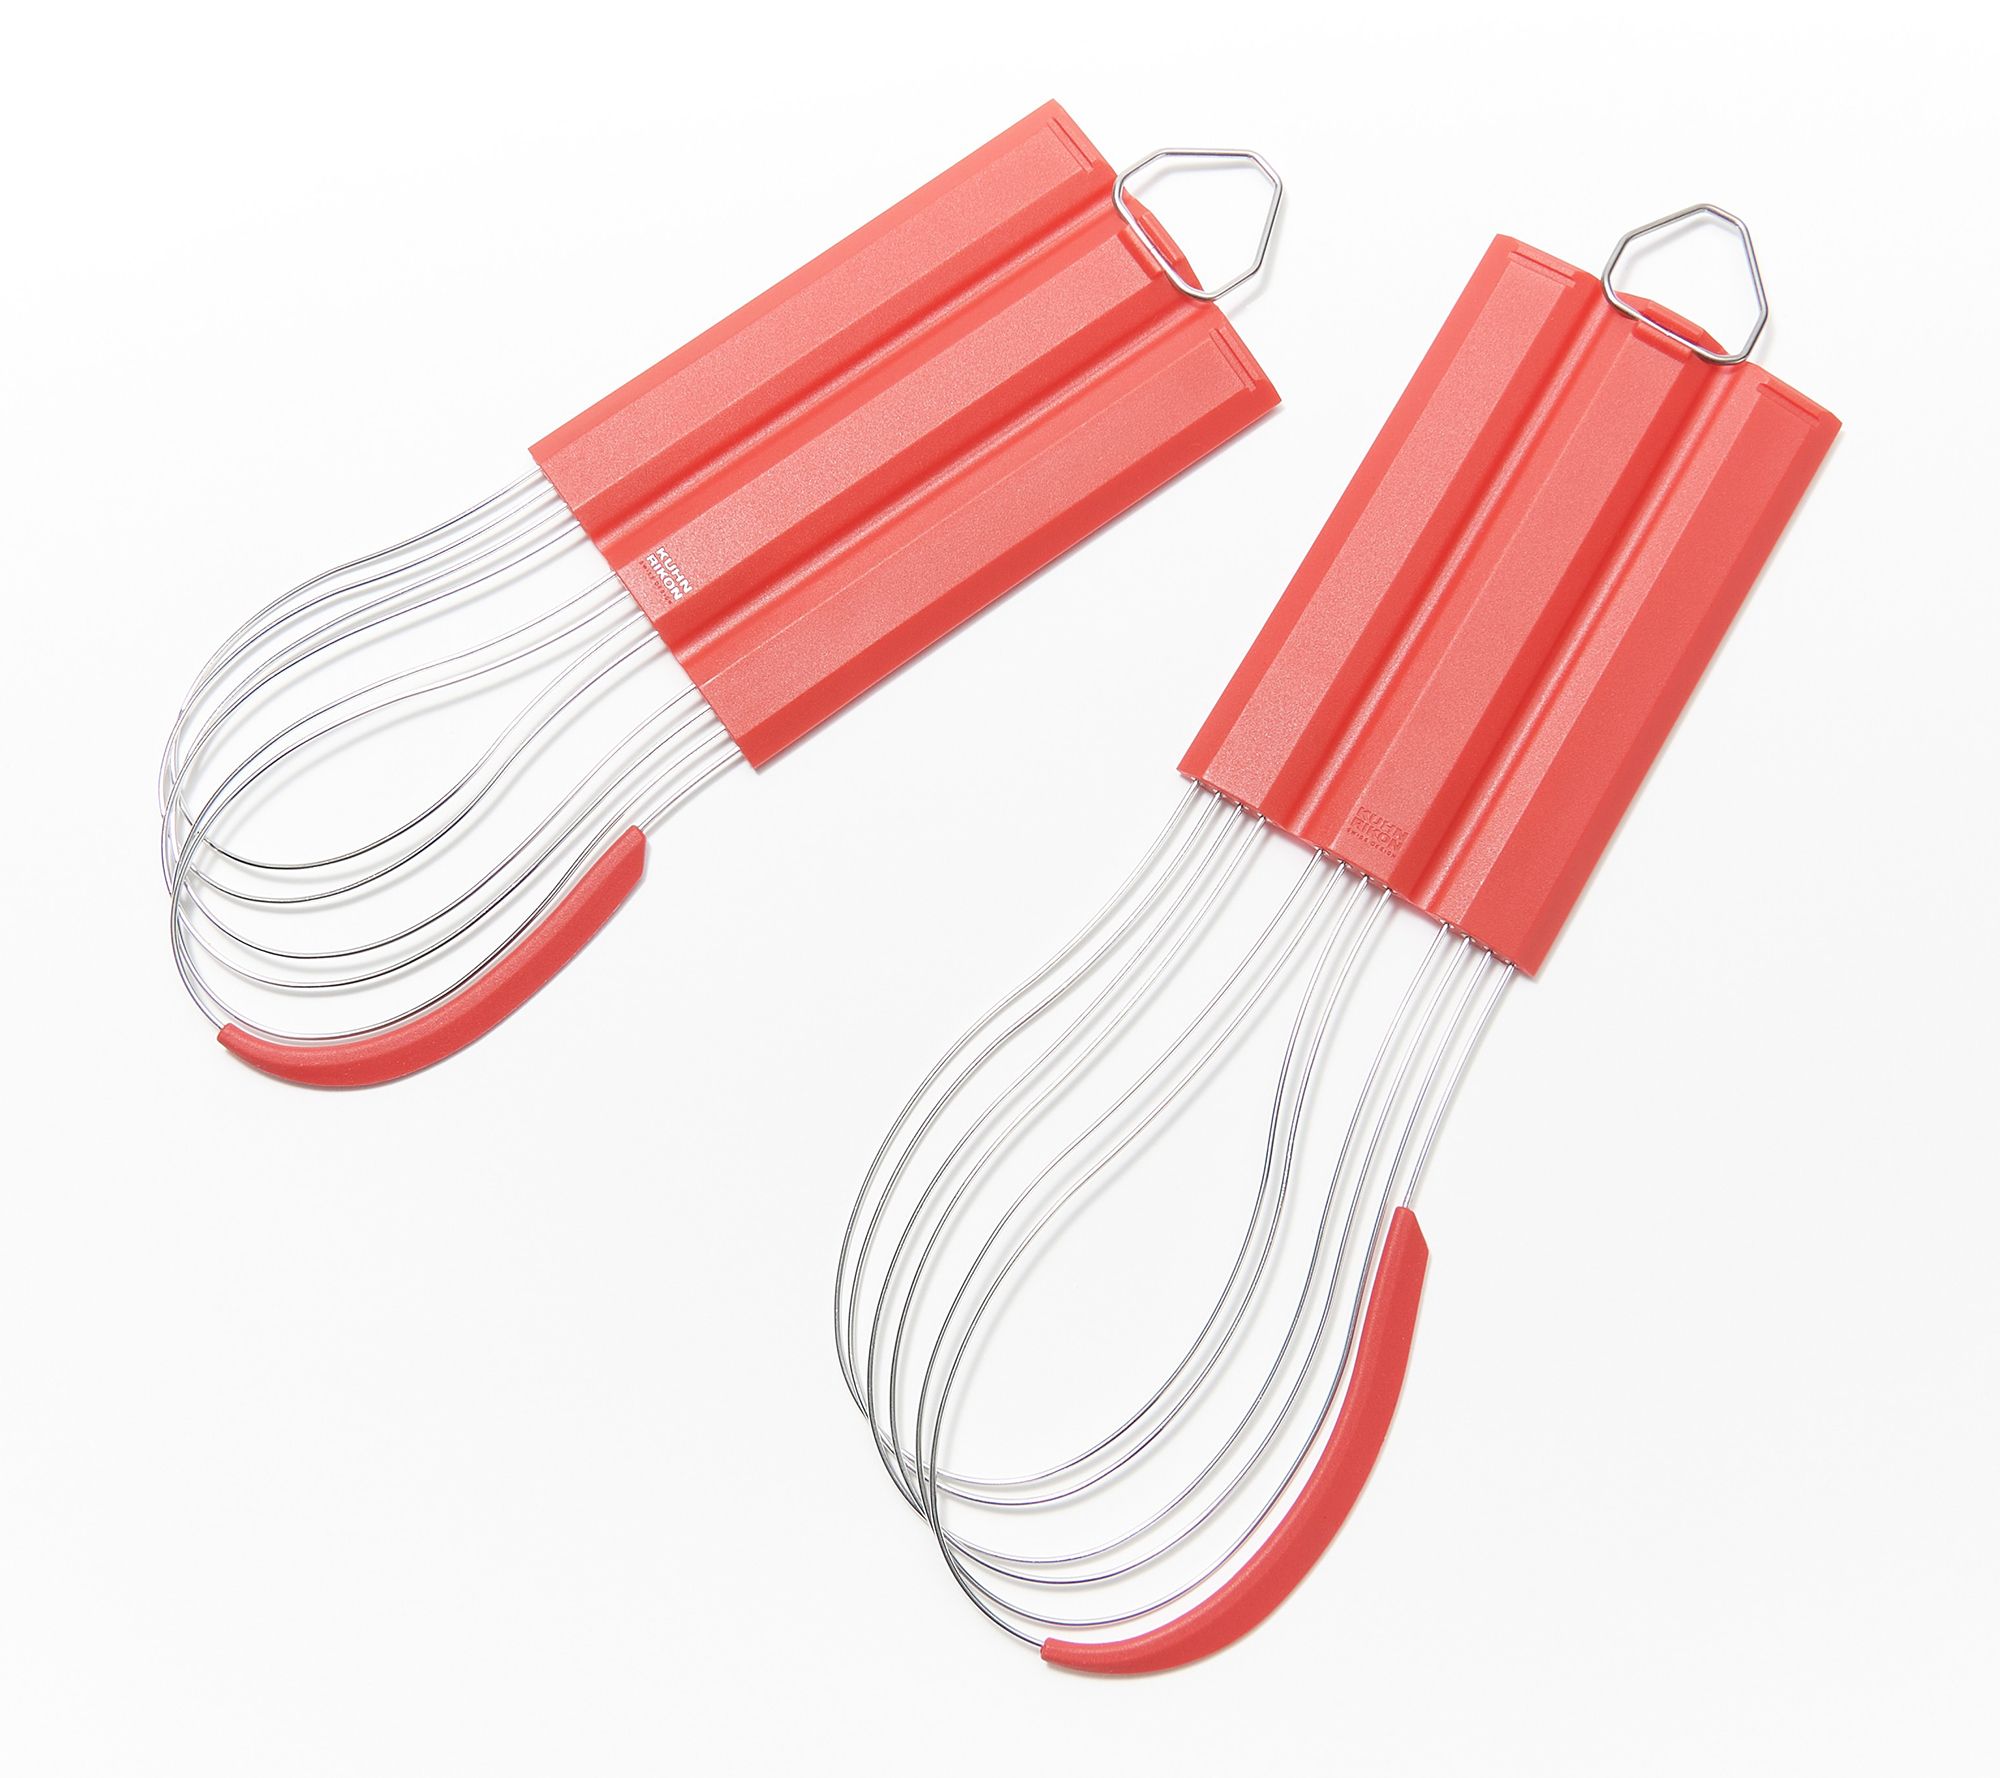 Gridfinity Bin for Oxo 11 Silicone Balloon Whisk by BombadBrad